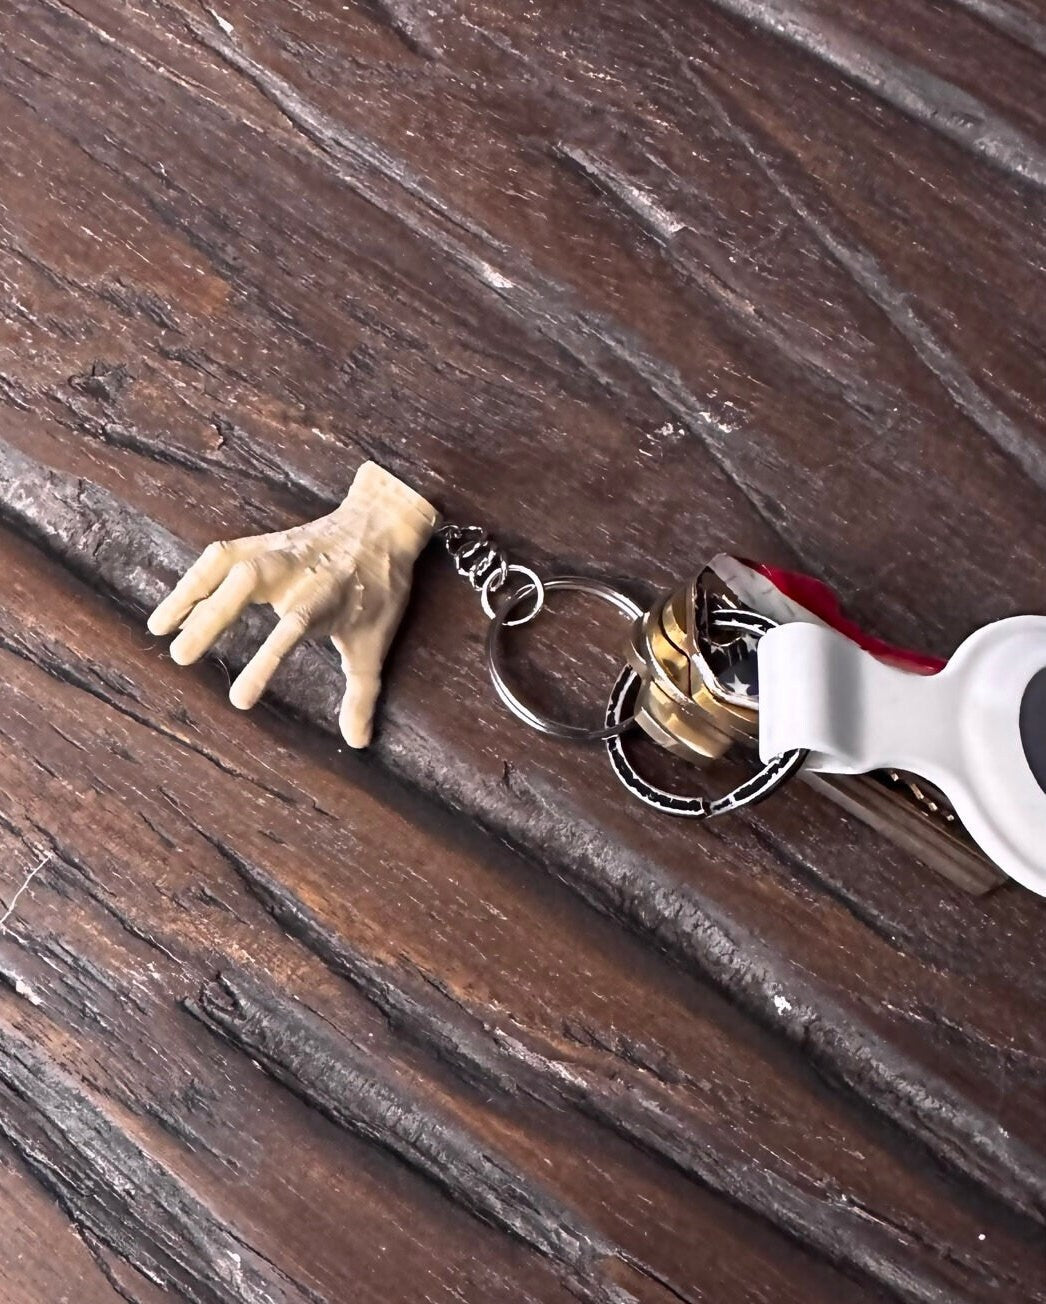 Thing Hand Keychain - Miniature Replica Inspired by Addams Family TV Series